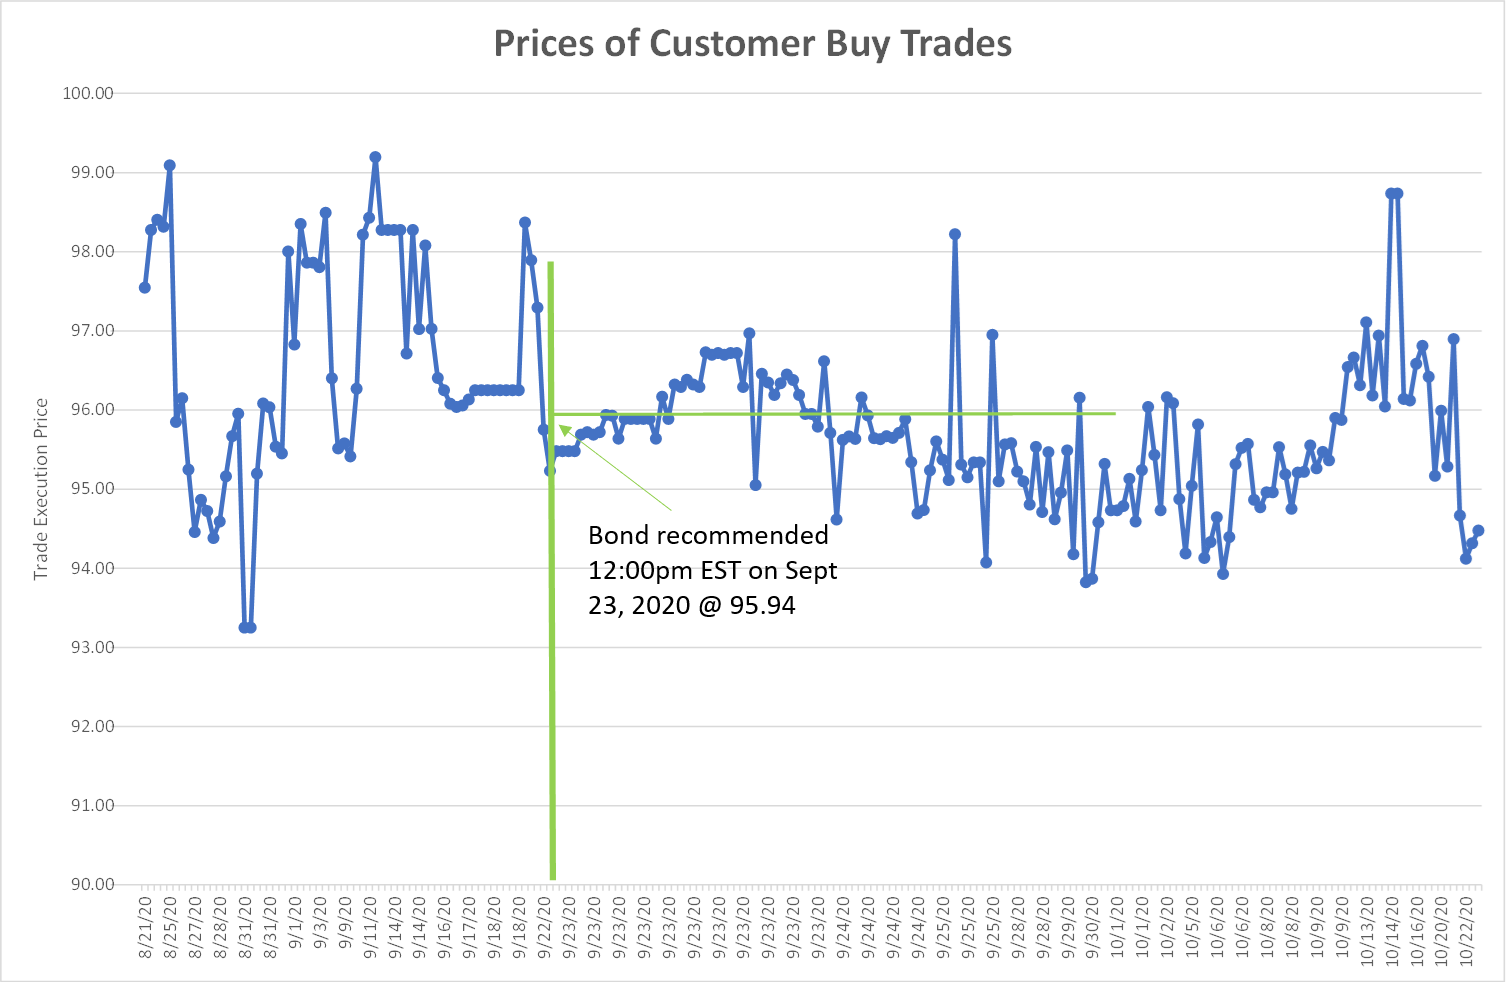 Prices of Corporate Bond Customer Buy Trades